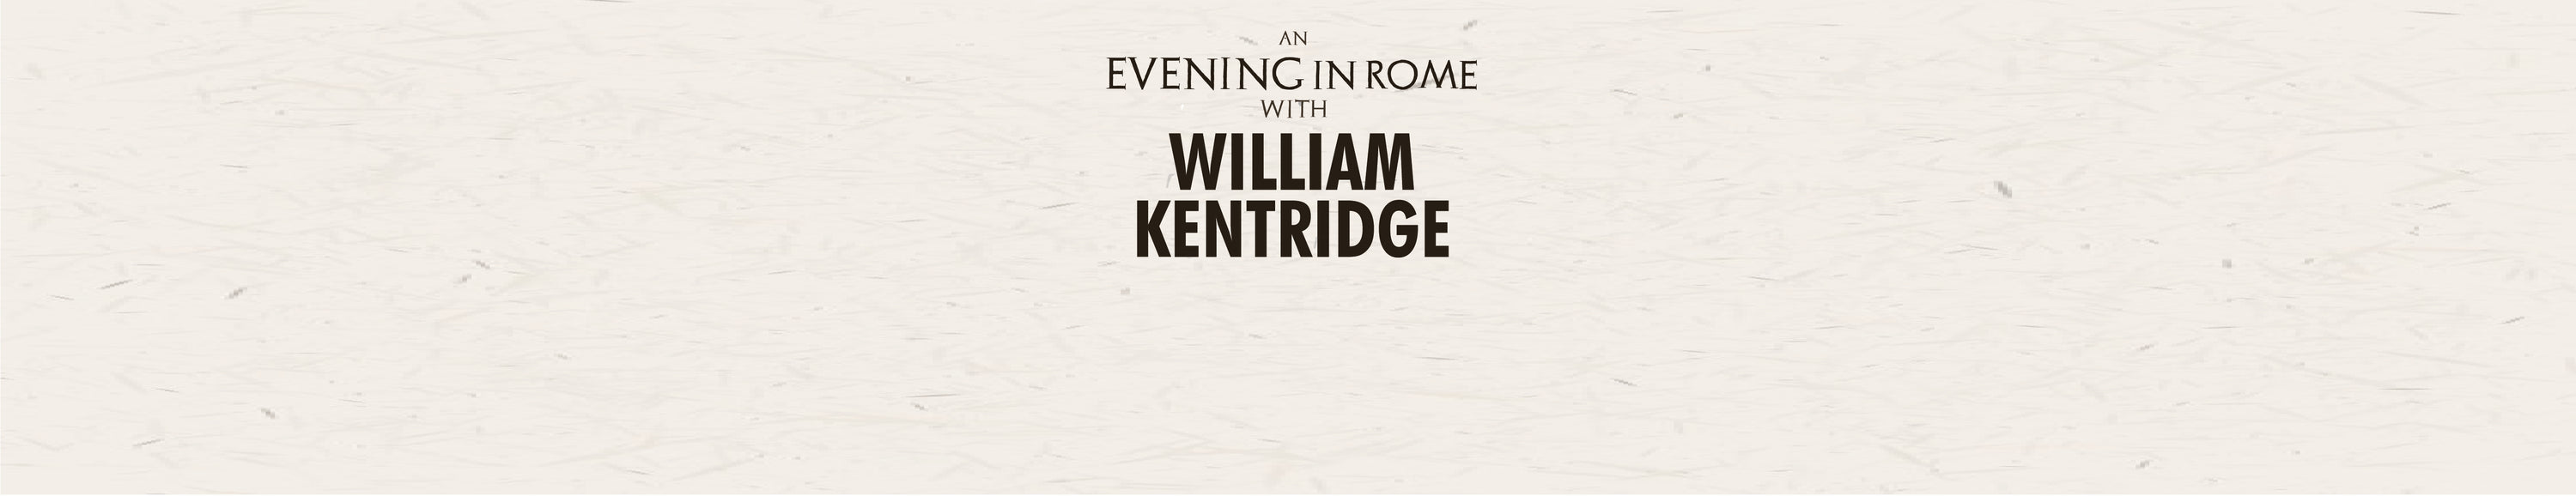 An Evening in Rome with William Kentridge